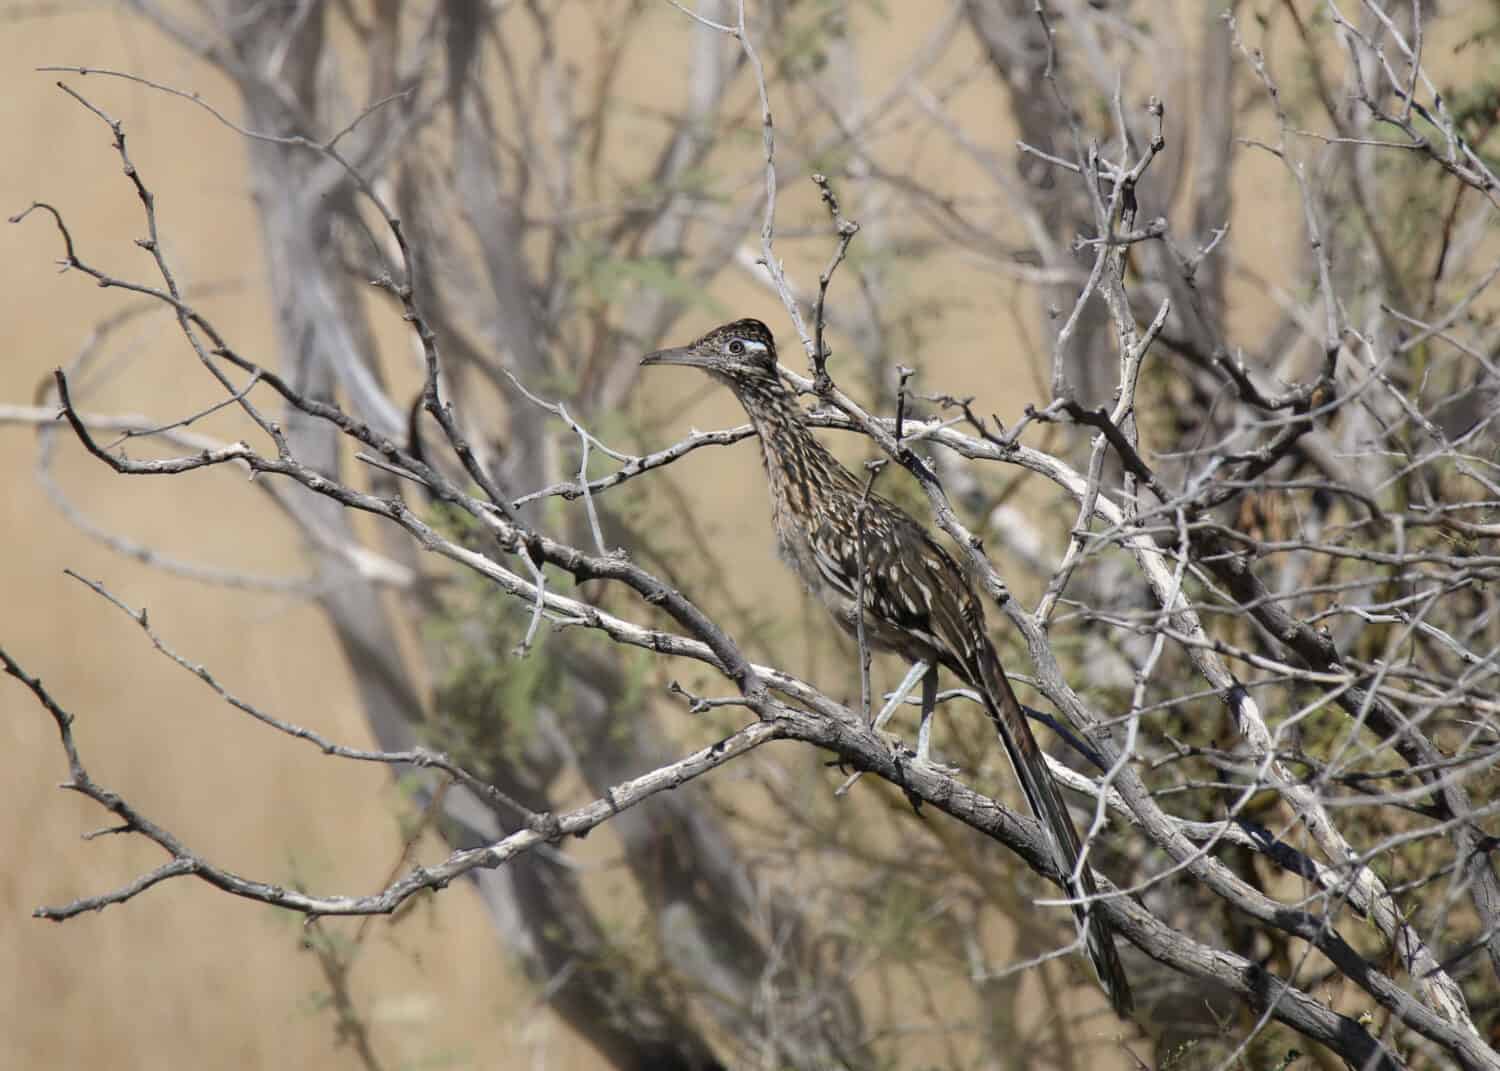 Greater Roadrunner (geococcyx californianus) perched in a tree